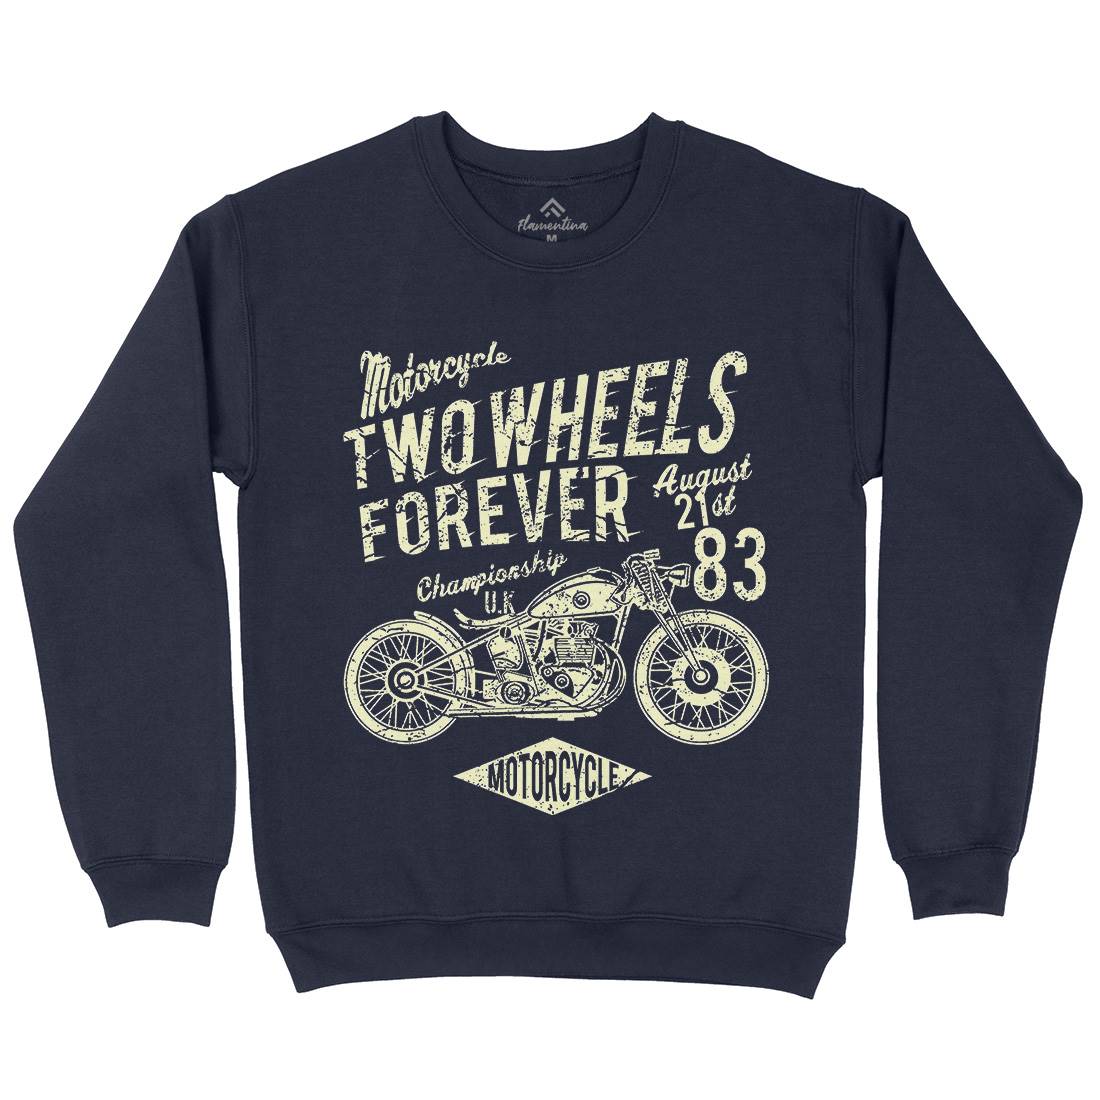 Two Wheels Forever Kids Crew Neck Sweatshirt Motorcycles A186